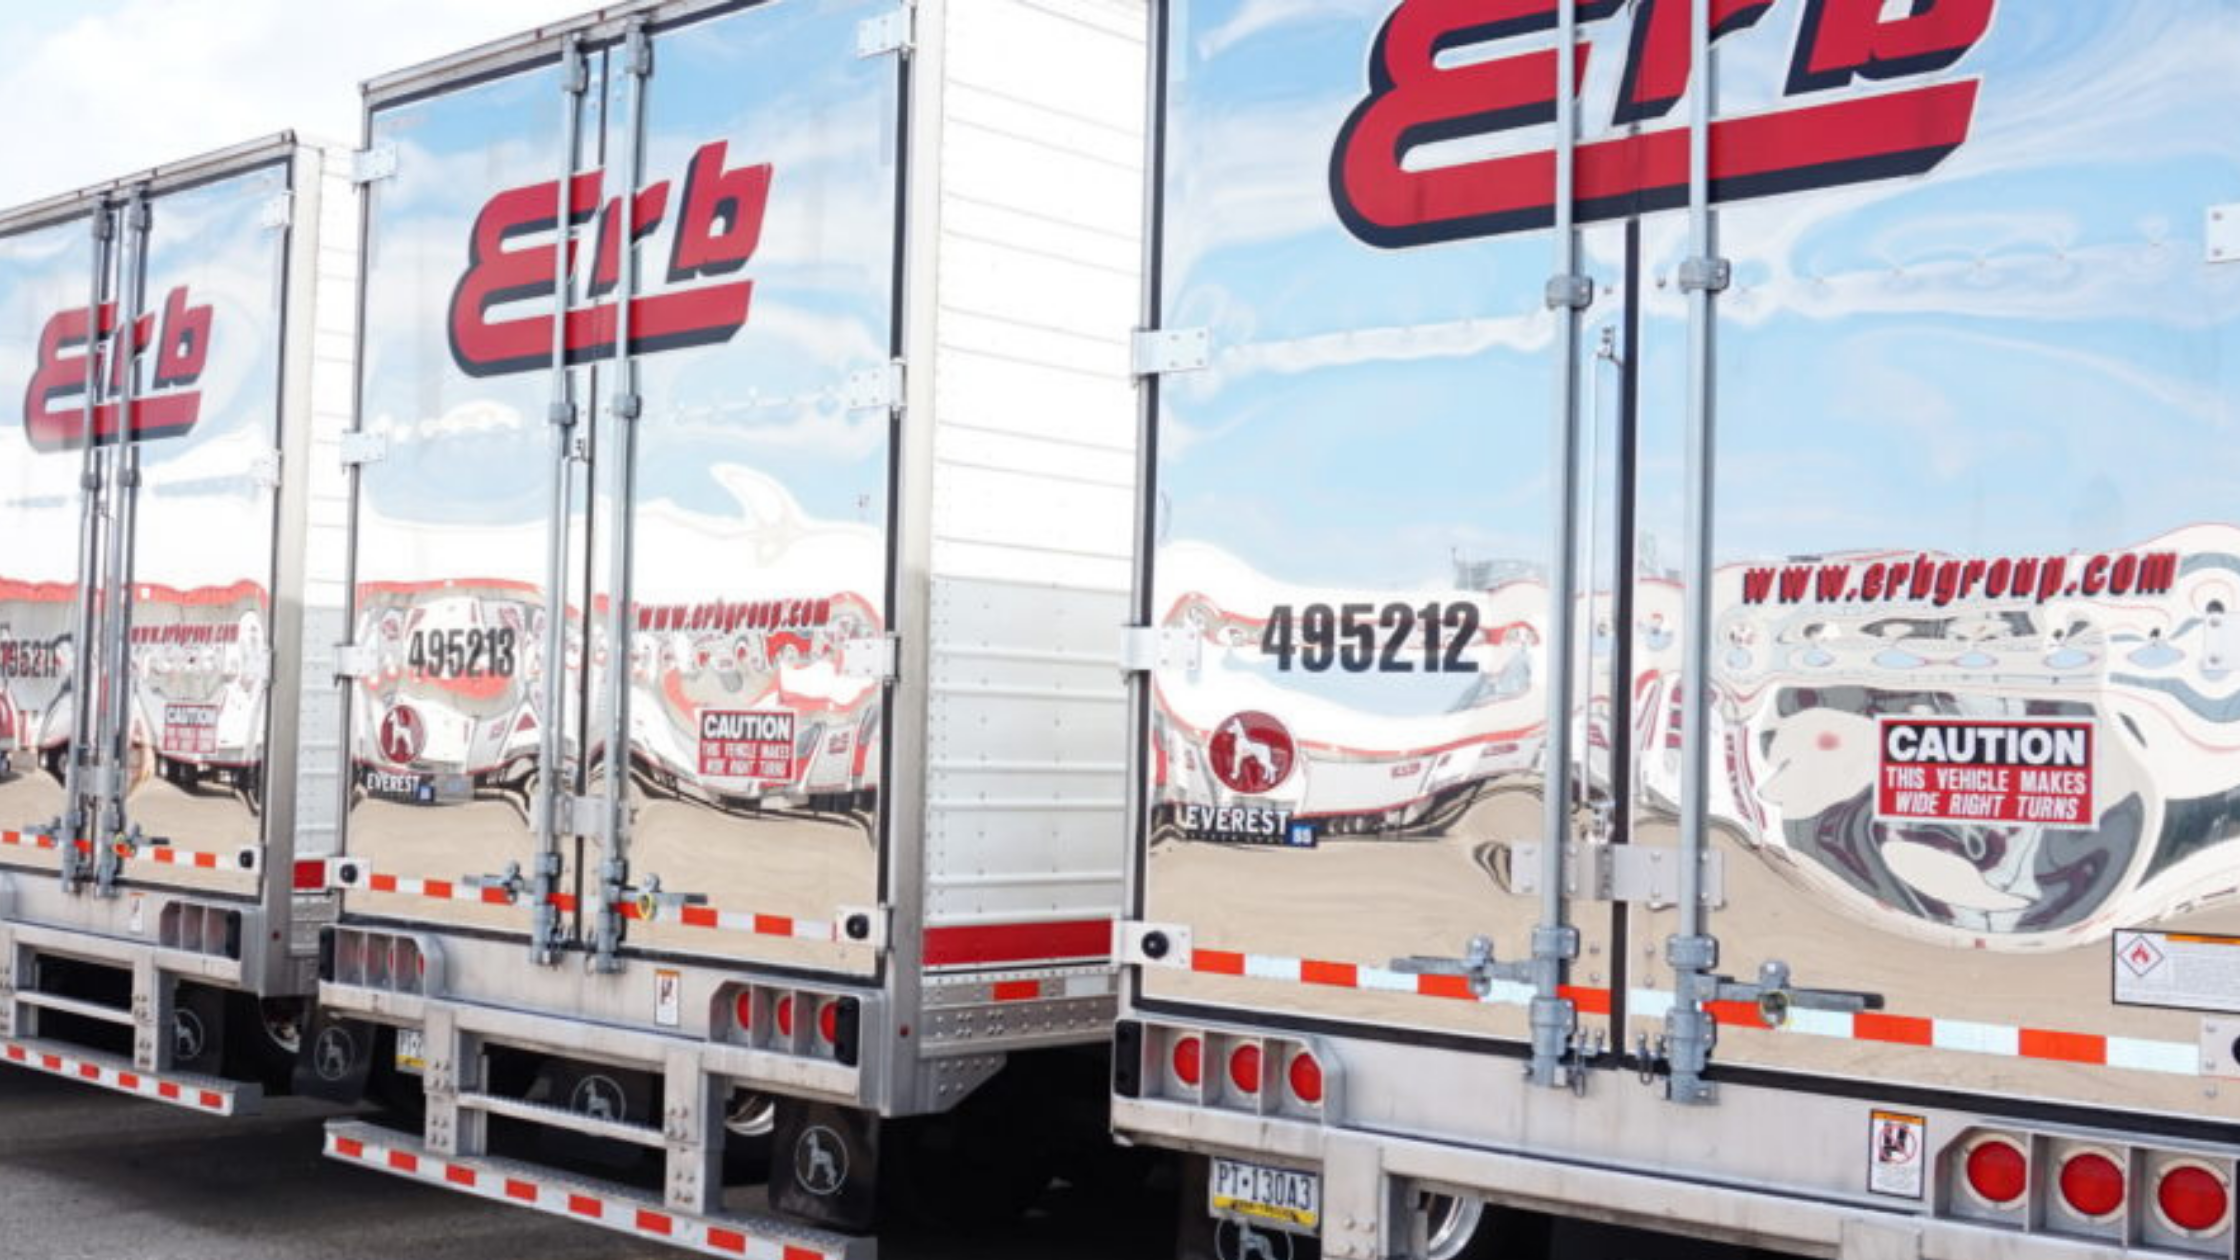 Five reasons why you should consider a career in trucking